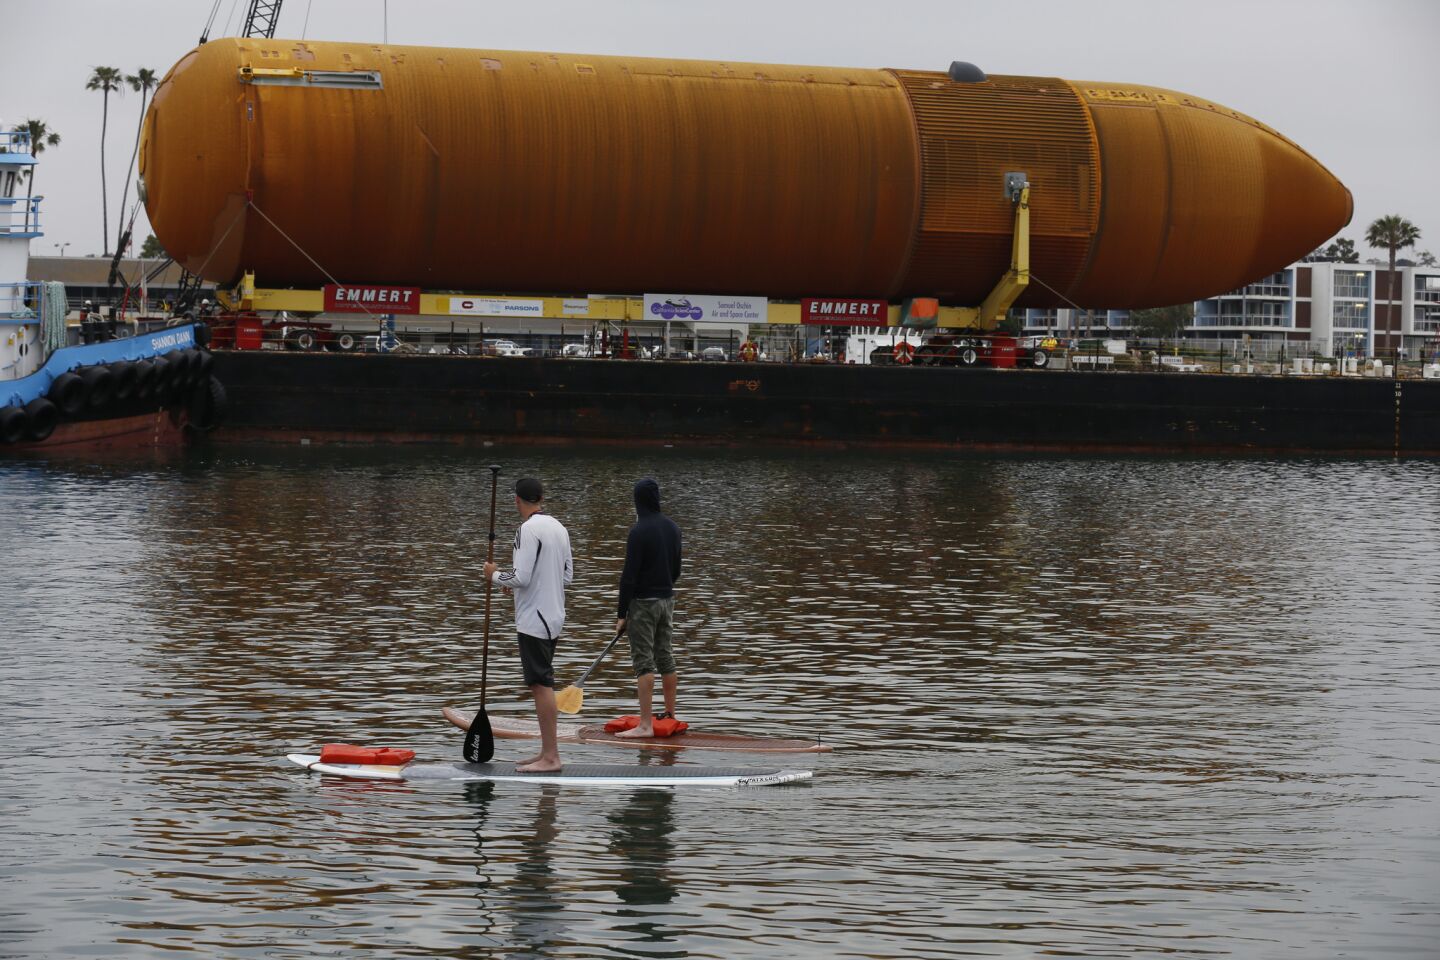 Paddleboarders watch as the space shuttle external fuel tank ET-94, the last of its kind, arrives in Marina del Rey.